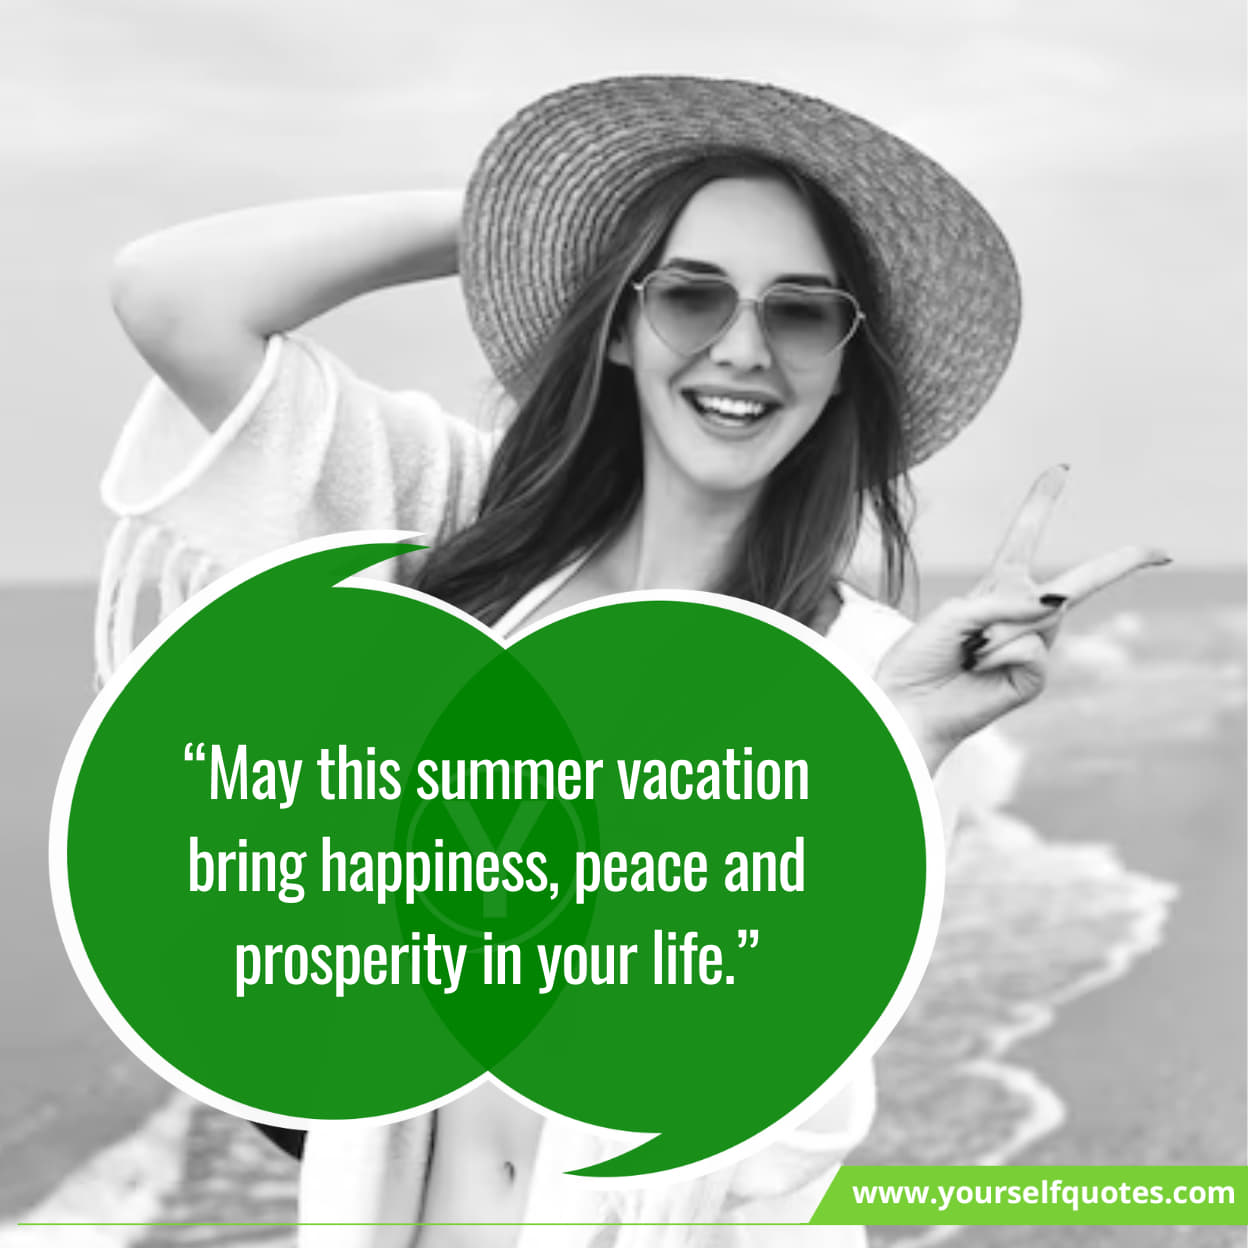 Warm wishes for a memorable summer getaway